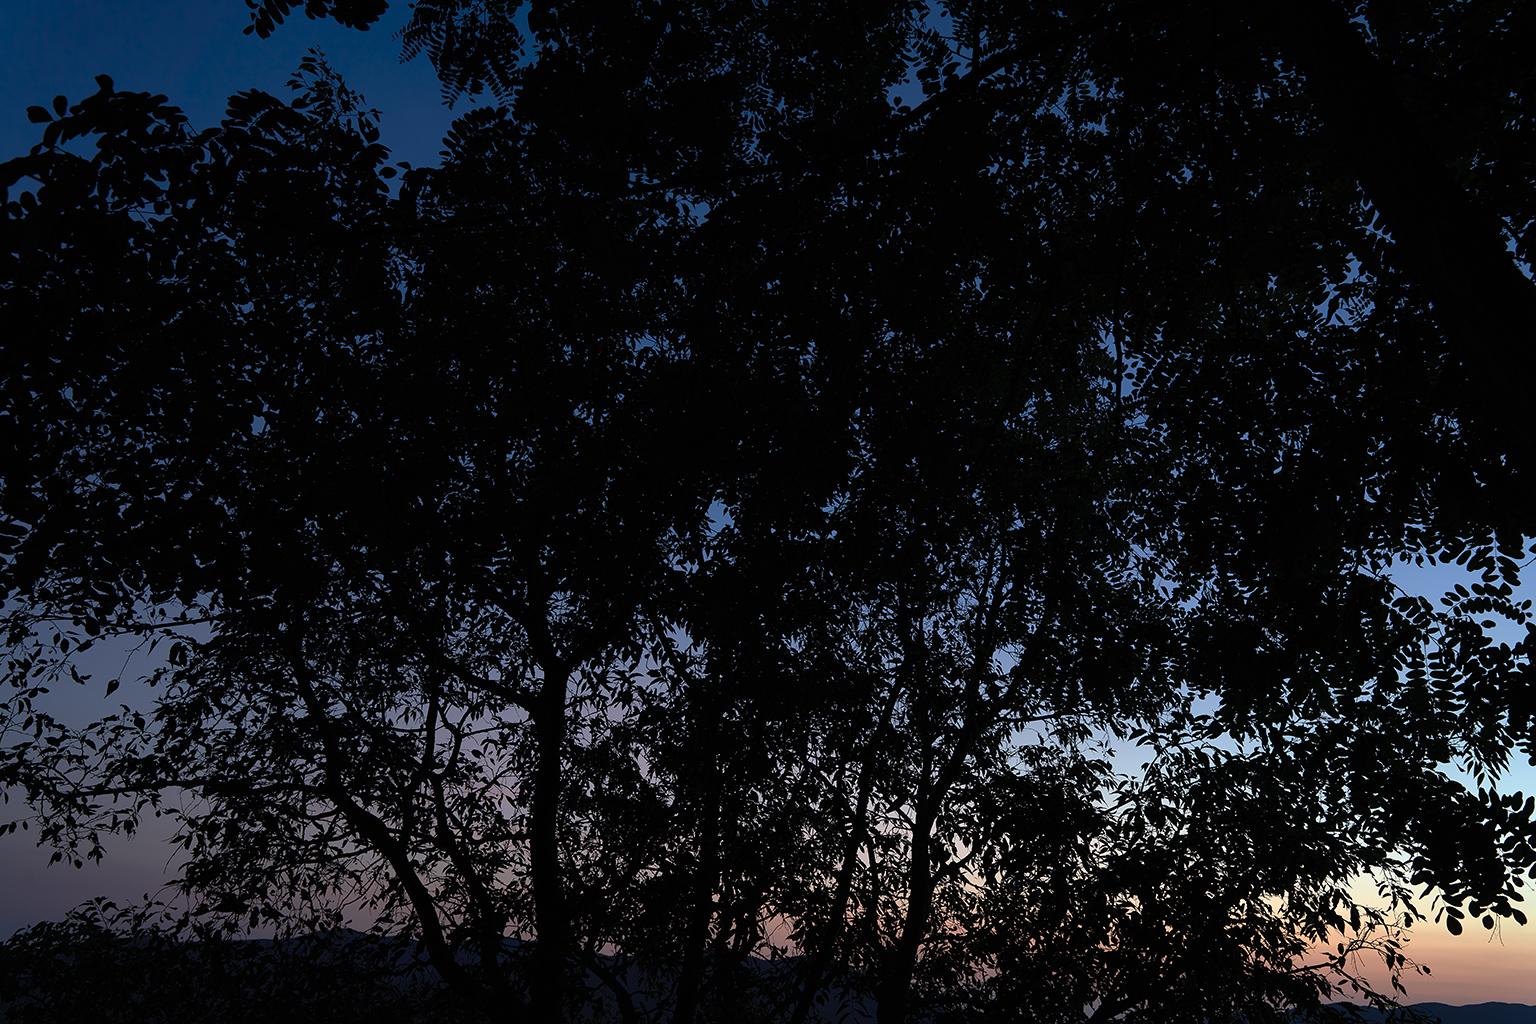 Blue Hour - large format photograph of ethereal foliage against evening sky